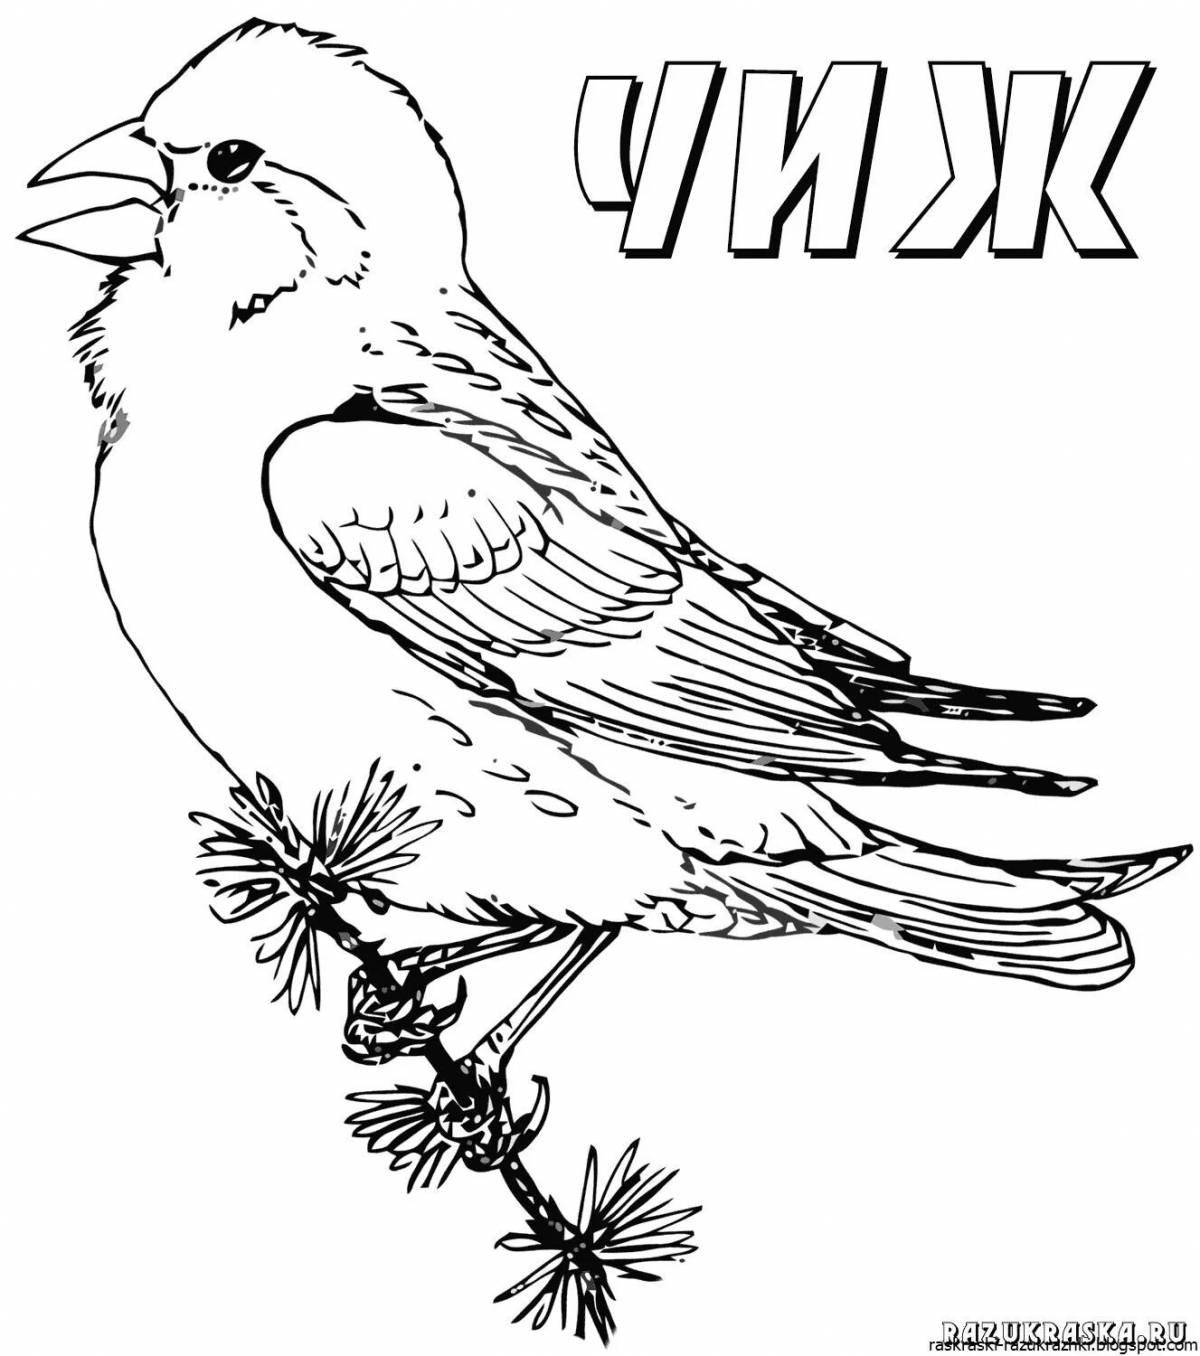 Wonderful bird coloring pages for preschoolers